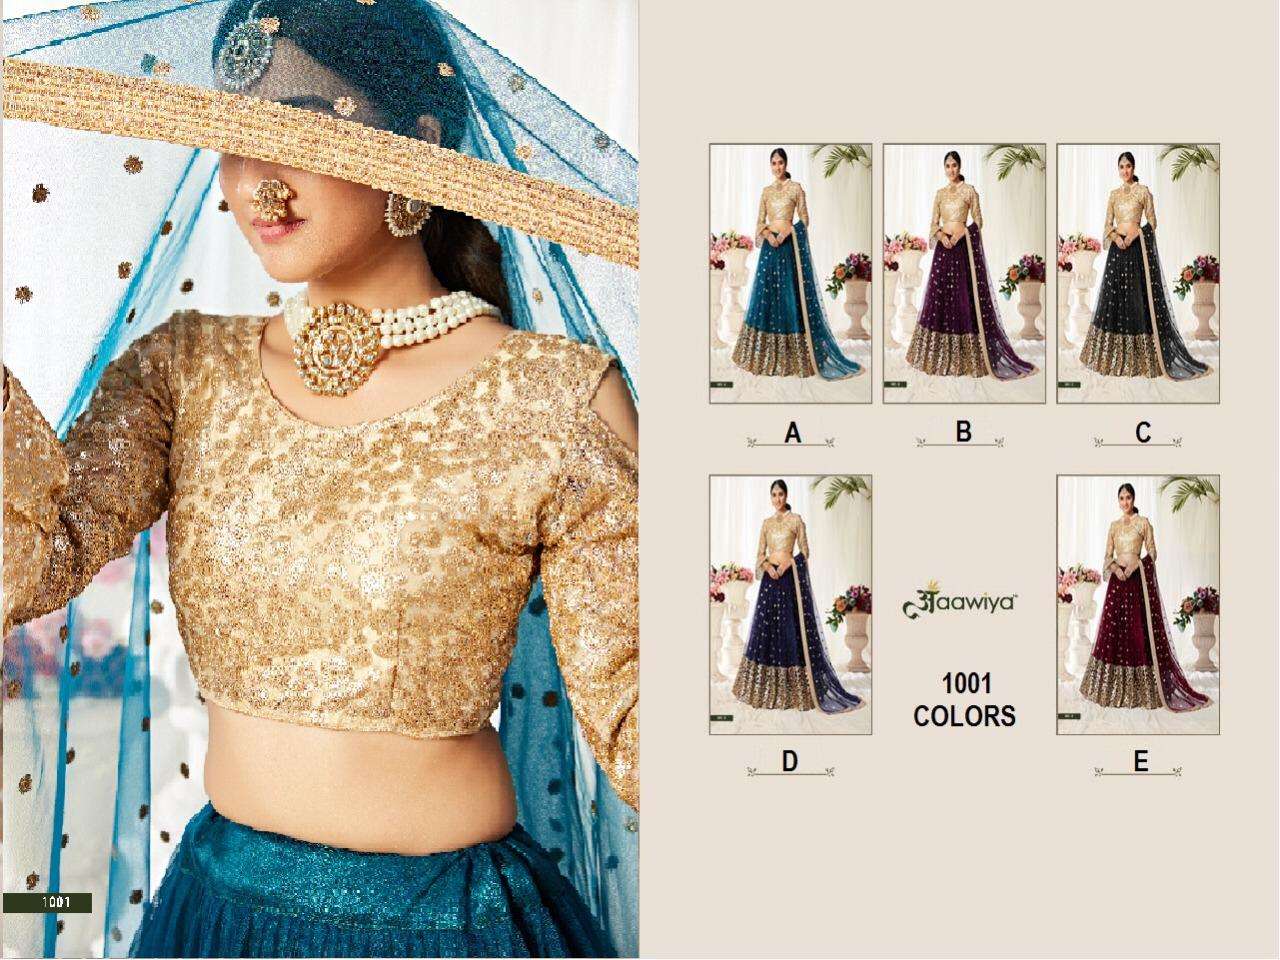 Agnilekha 1001 Colours By Aawiya 1001-A To 1001-E Series Indian Traditional Beautiful Stylish Designer Banarasi Silk Jacquard Embroidered Party Wear Net Lehengas At Wholesale Price